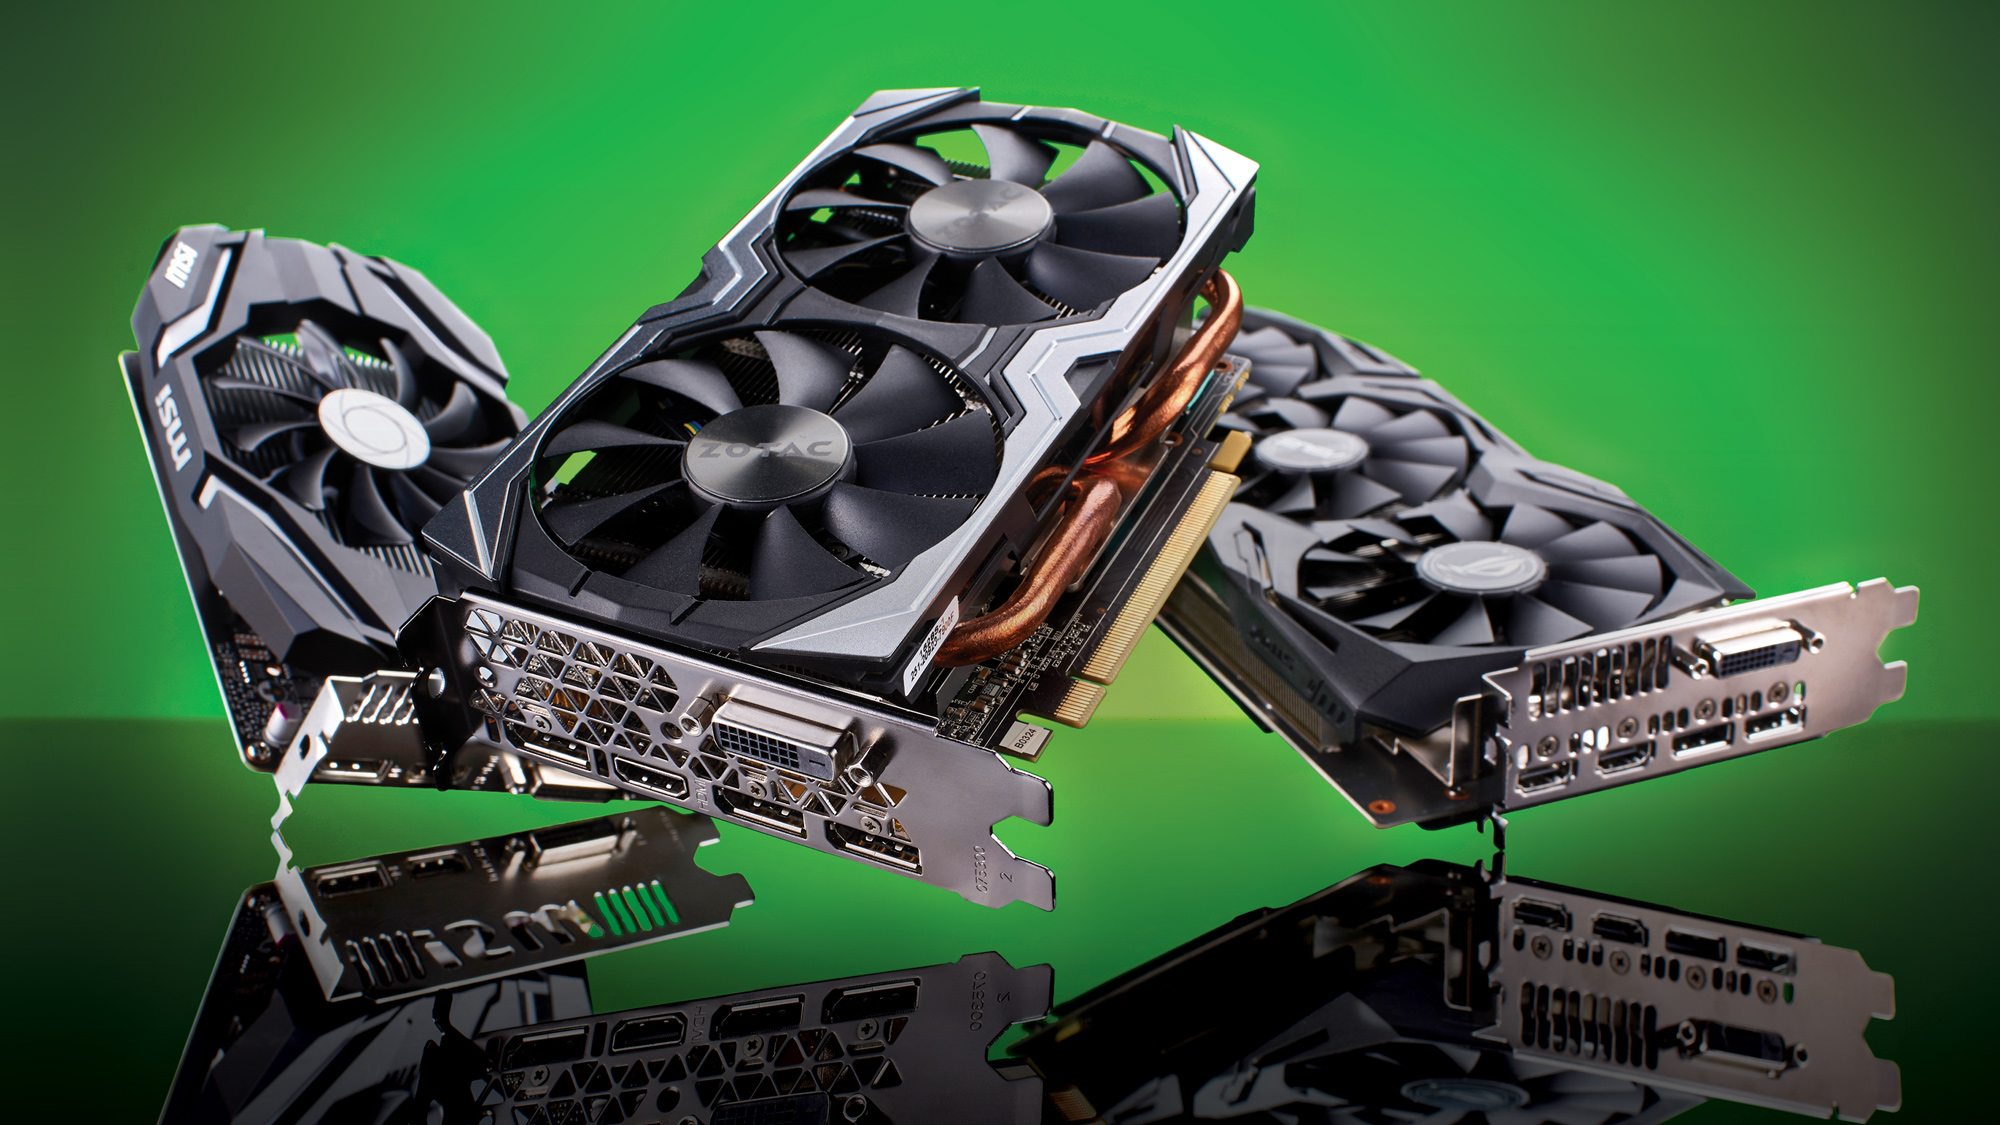 Which are the best graphics cards to enhance gaming?